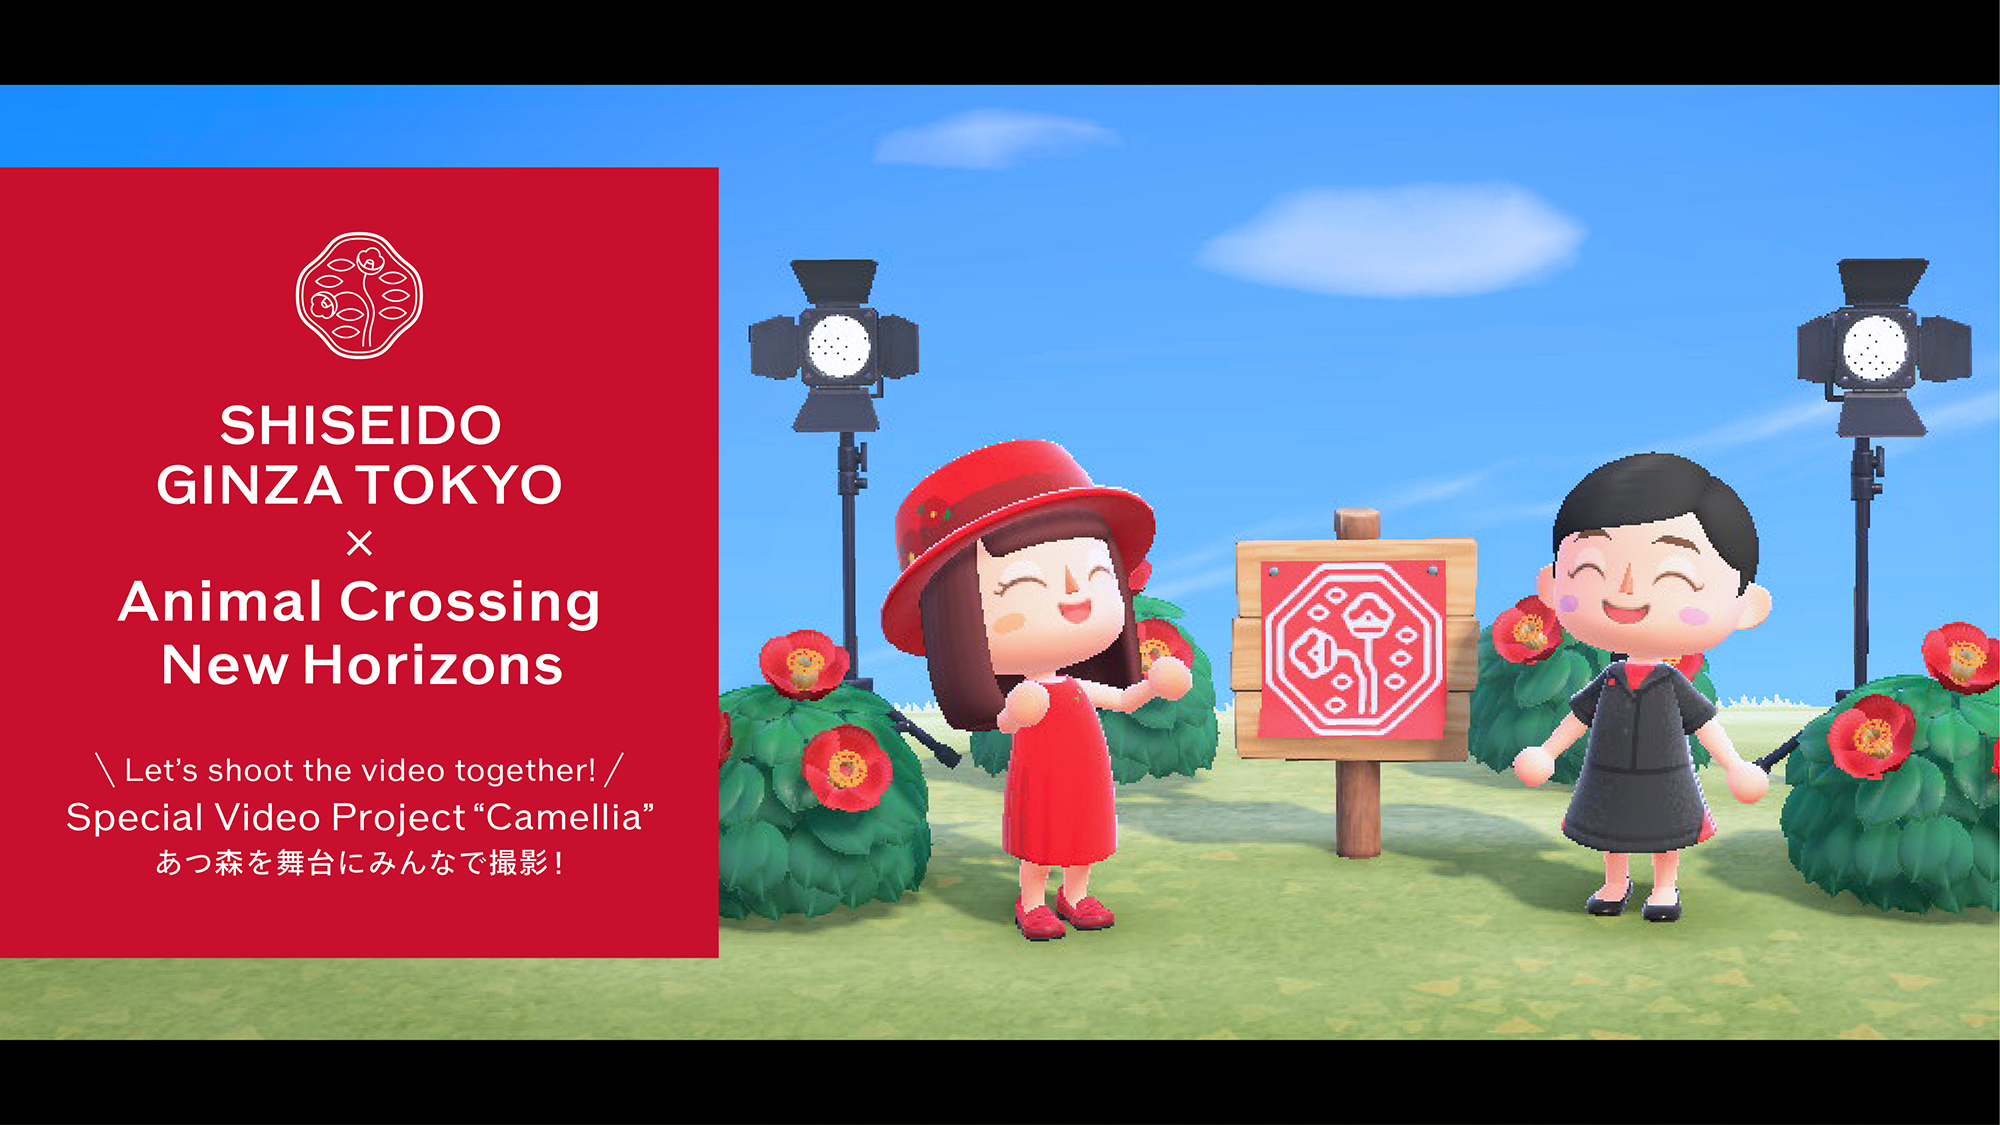 SHISEIDO to launch a special movie project set in the world of Animal  Crossing: New Horizons | NEWS RELEASE | Shiseido Company